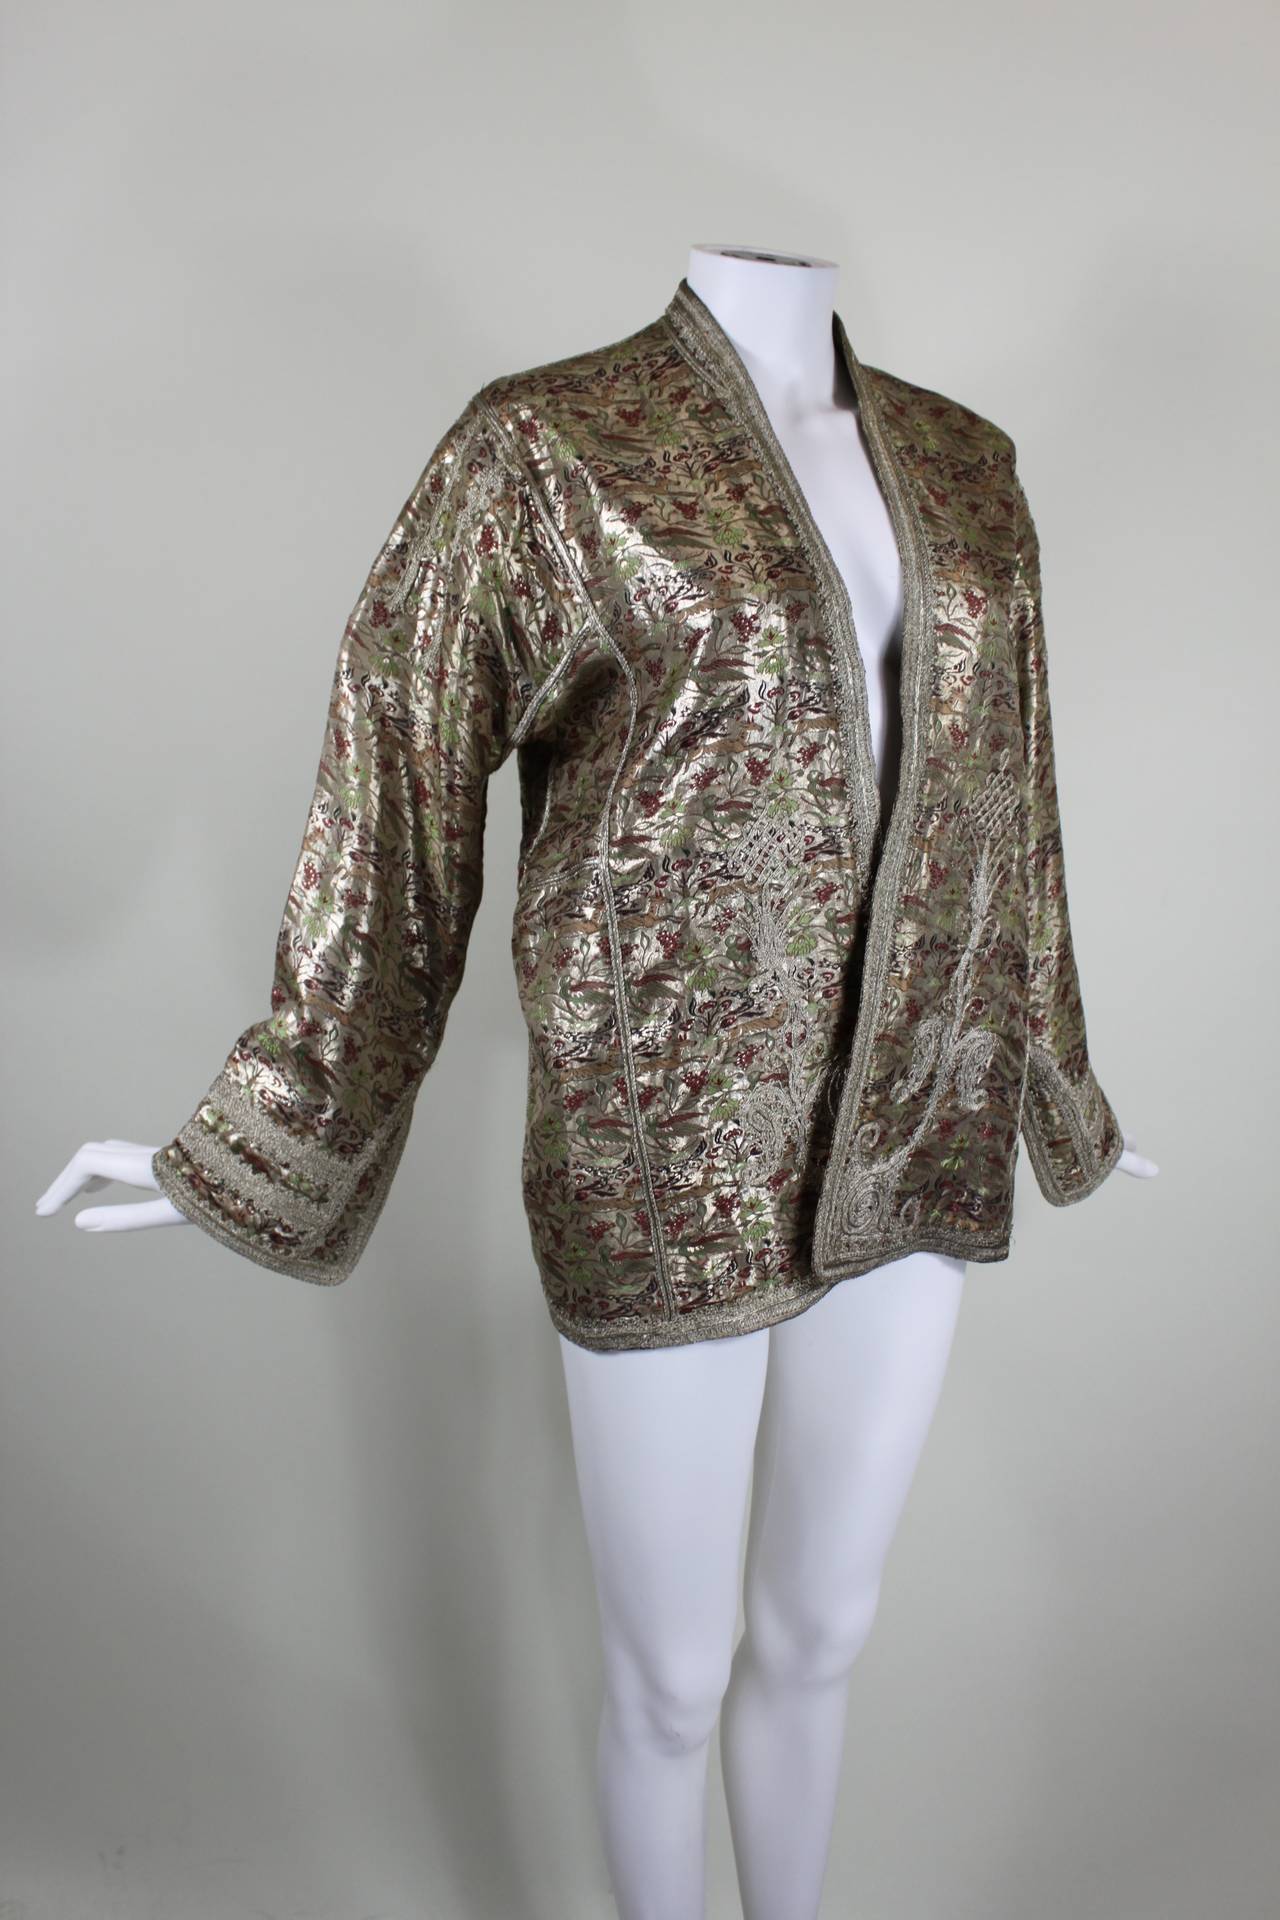 This is an absolutely stunning silver metallic jacket from the 1930s. A gazelle and bird motif is embroidered in vibrant red and green against a gorgeous metallic background. The sleeves, shoulders (front and back), and front panels are embroidered